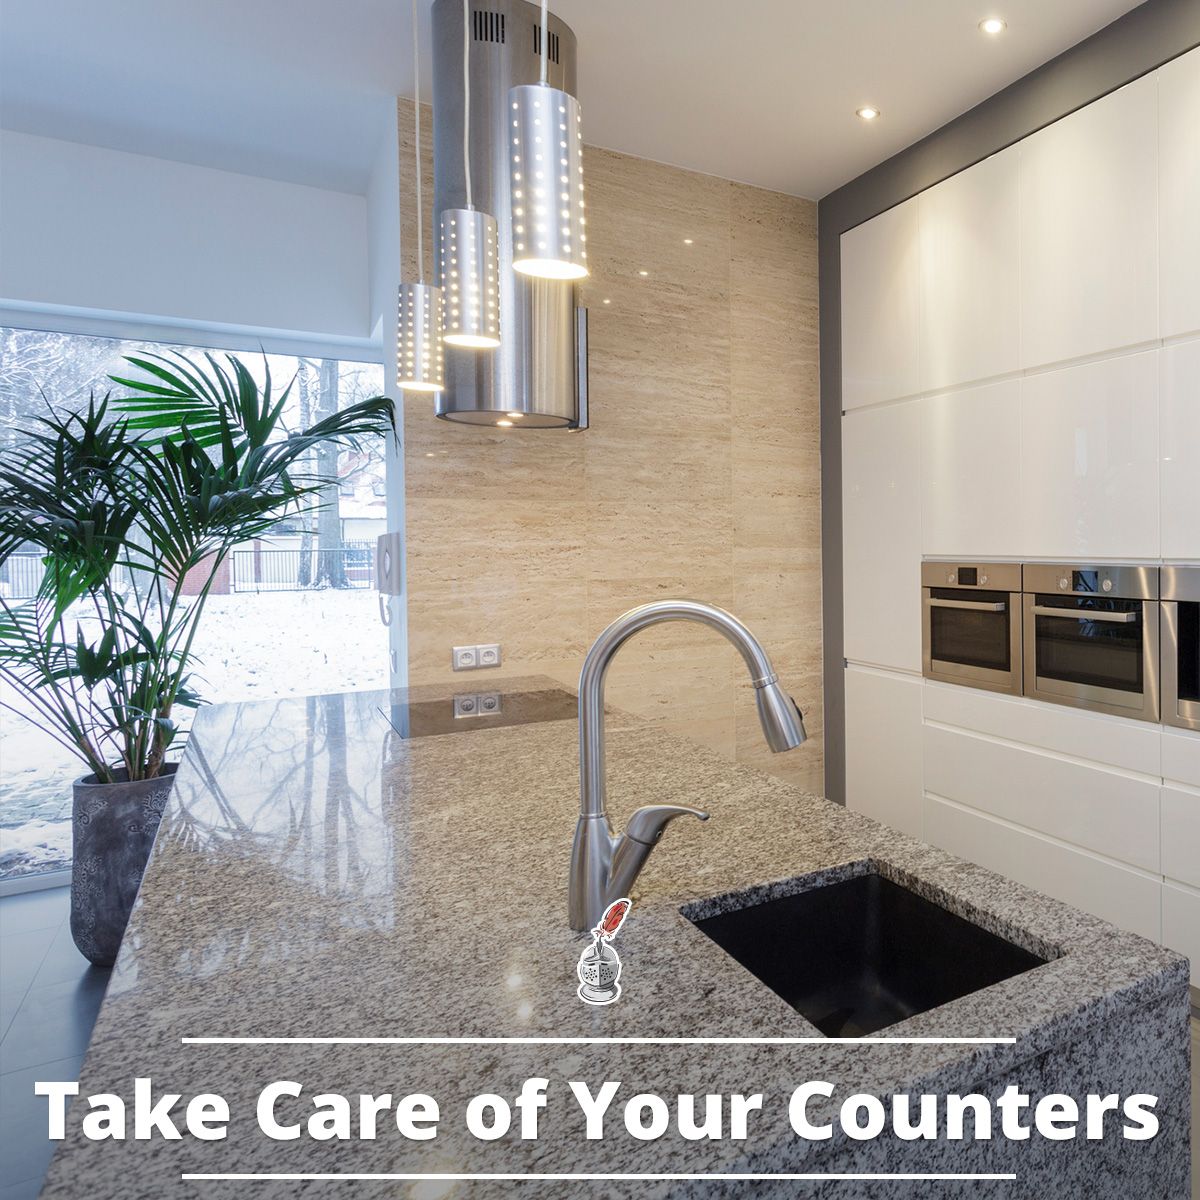 Take Care of Your Counters